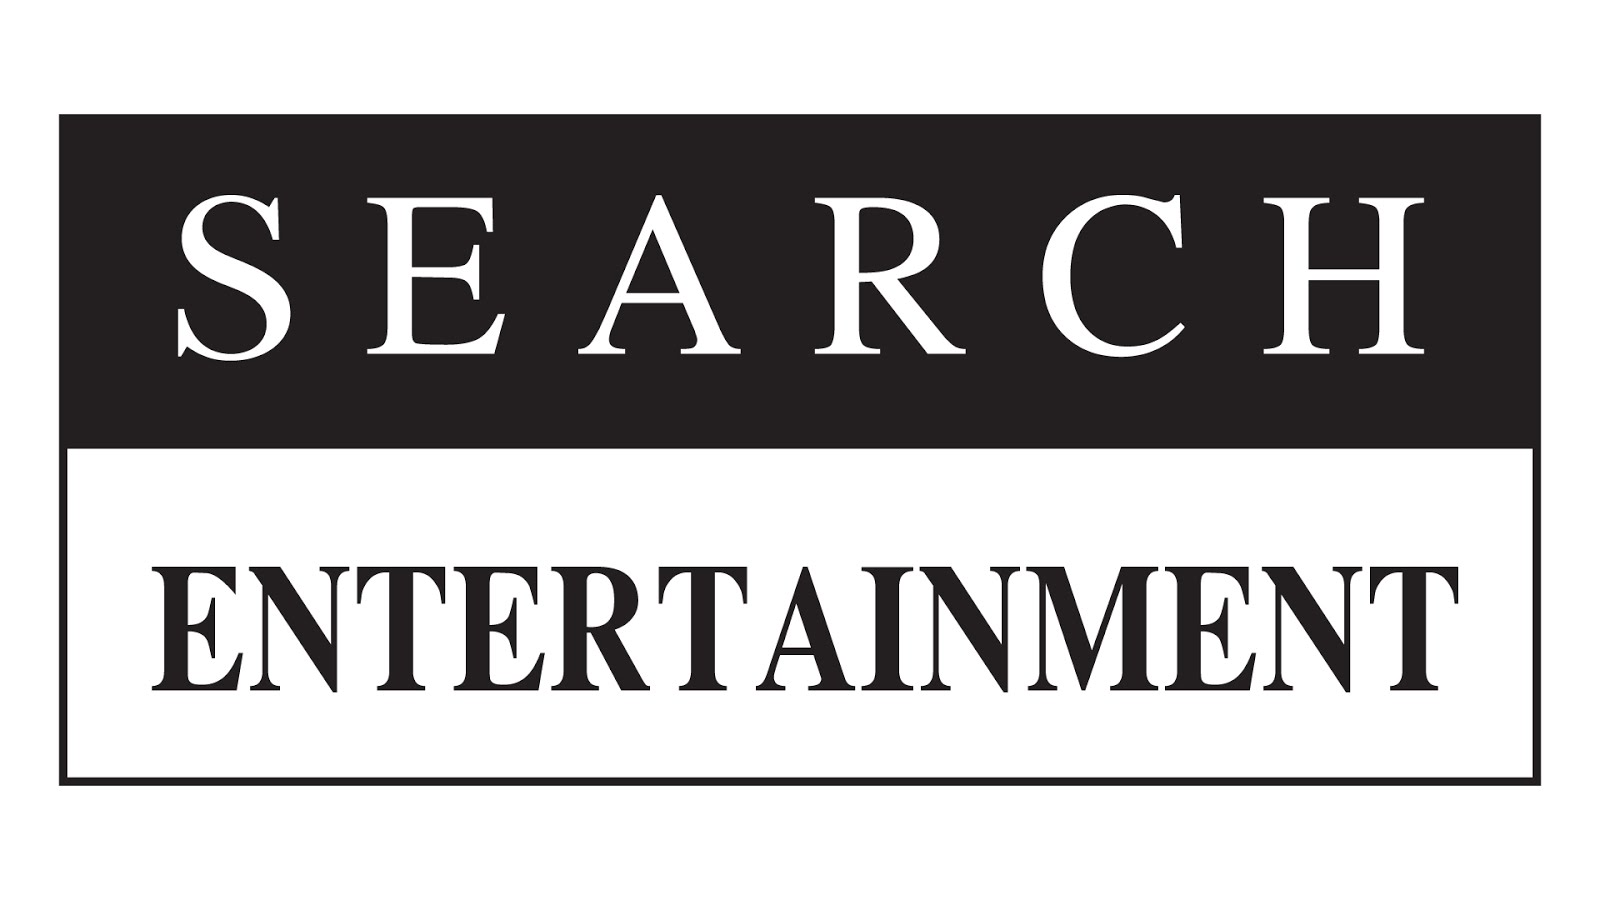 SEARCH ENTERTAINMENT